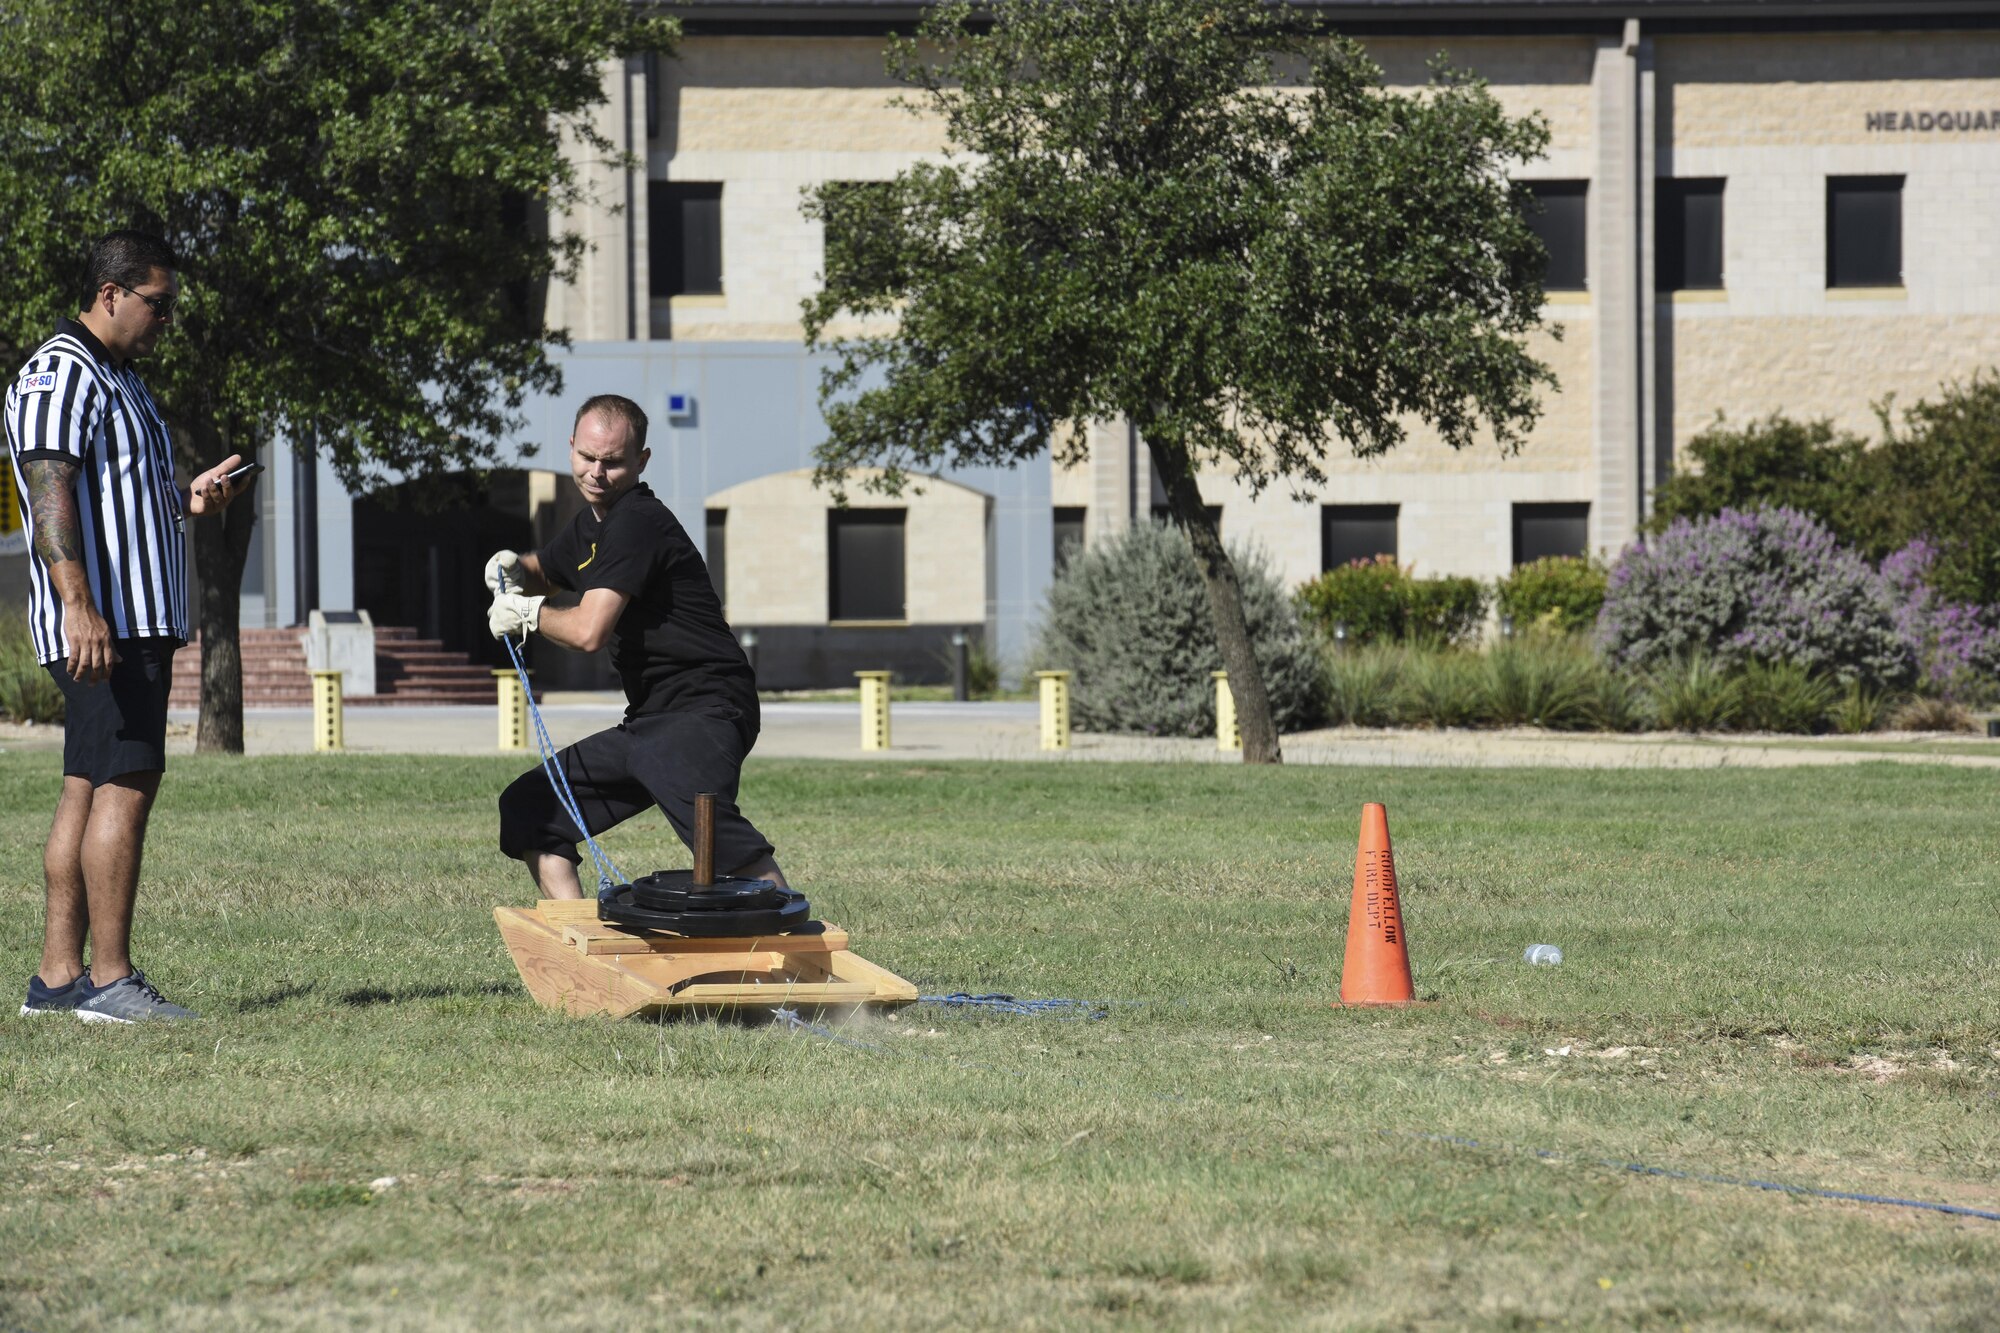 James Orlando, 17th Training Wing Public Affairs visual information specialist, pulls a sled of weights during the Fire Muster Challenge beside the Fire Department on Goodfellow Air Force Base, Texas Oct. 13, 2017. The Fire Muster Challenge tested a team’s strength and ability to work together. (U.S. Air Force photo by Airman 1st Class Zachary Chapman/Released)